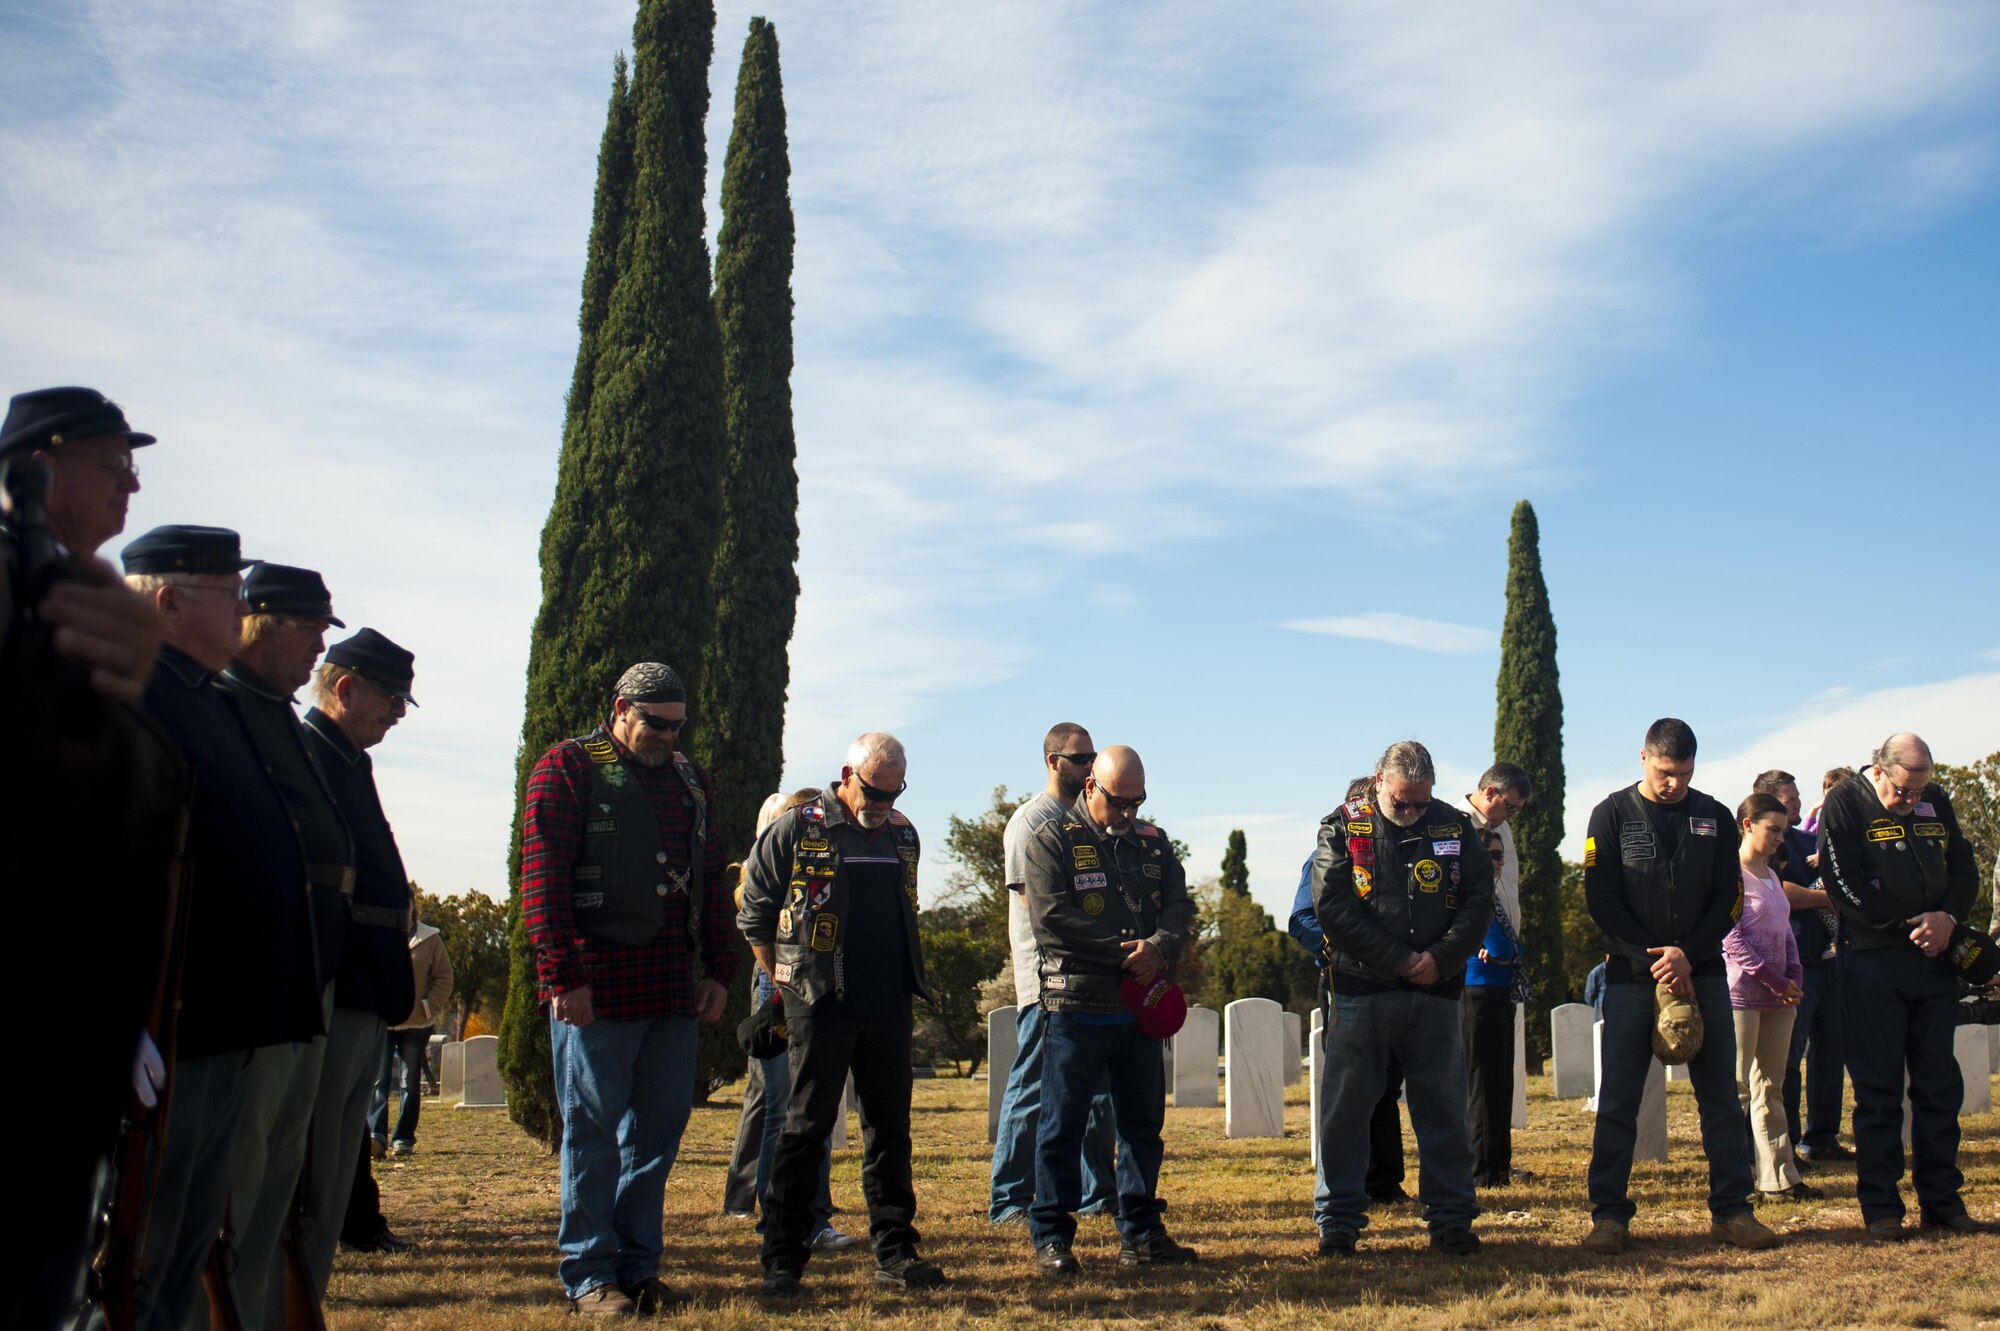 Forth Concho volunteers, Combat Vets Association members and San Angelo members bow their heads during the invocation for Wreaths Across America at Belvedere Cemetery, San Angelo, Texas, Dec. 17, 2016. The ceremony was to honor and give thanks to all deceased veterans. (U.S. Air Force photo by Senior Airman Scott Jackson/released)